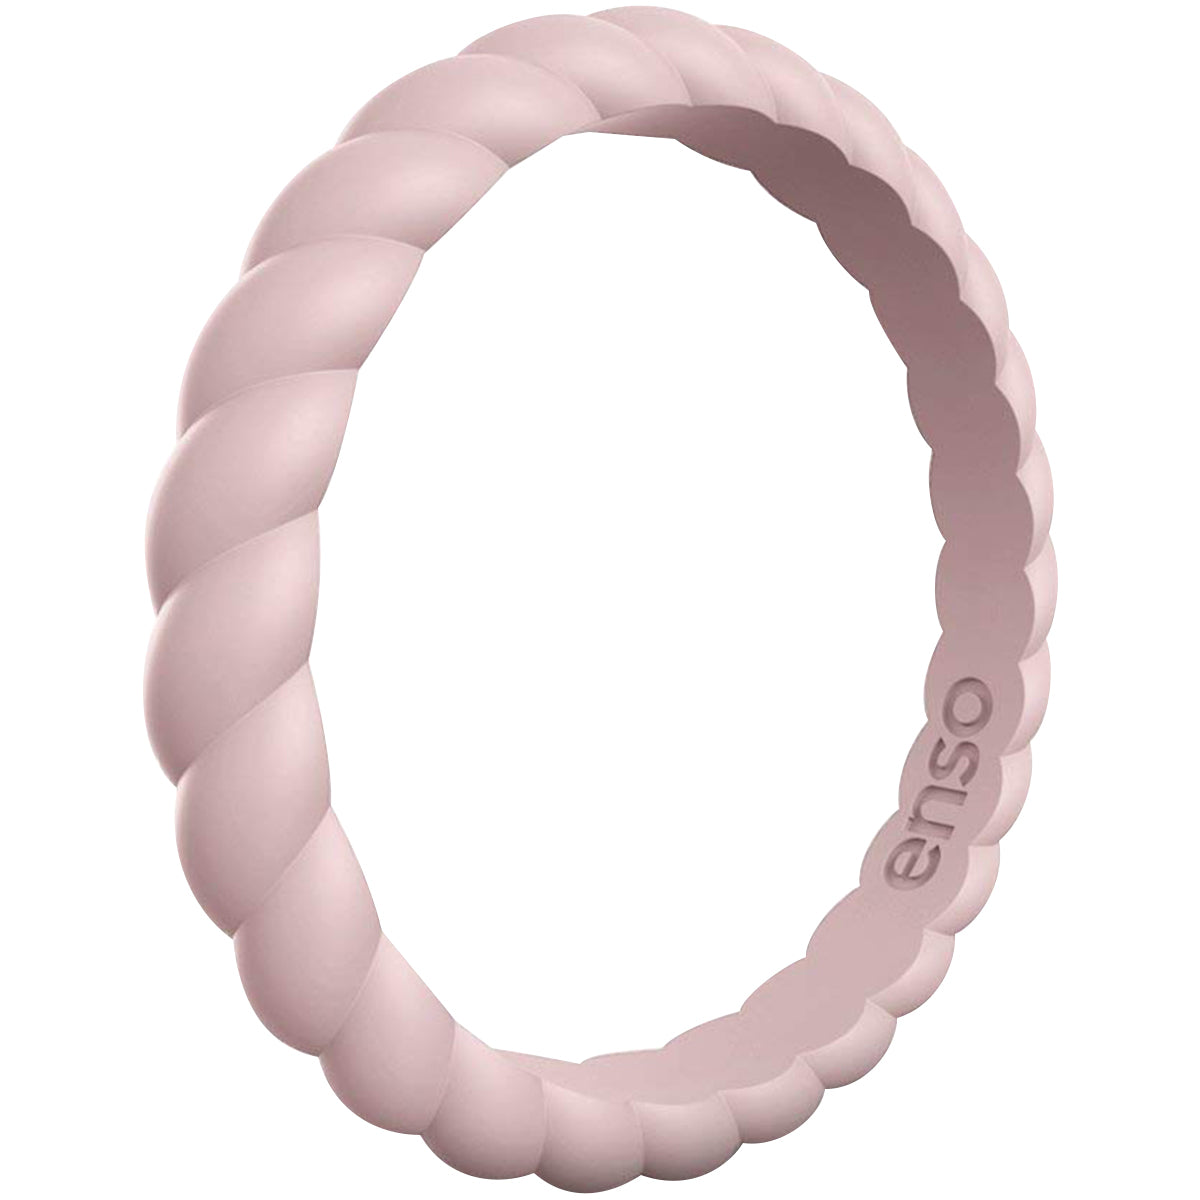 Enso Rings Braided Stackables Series Silicone Ring - Pink Sand Enso Rings